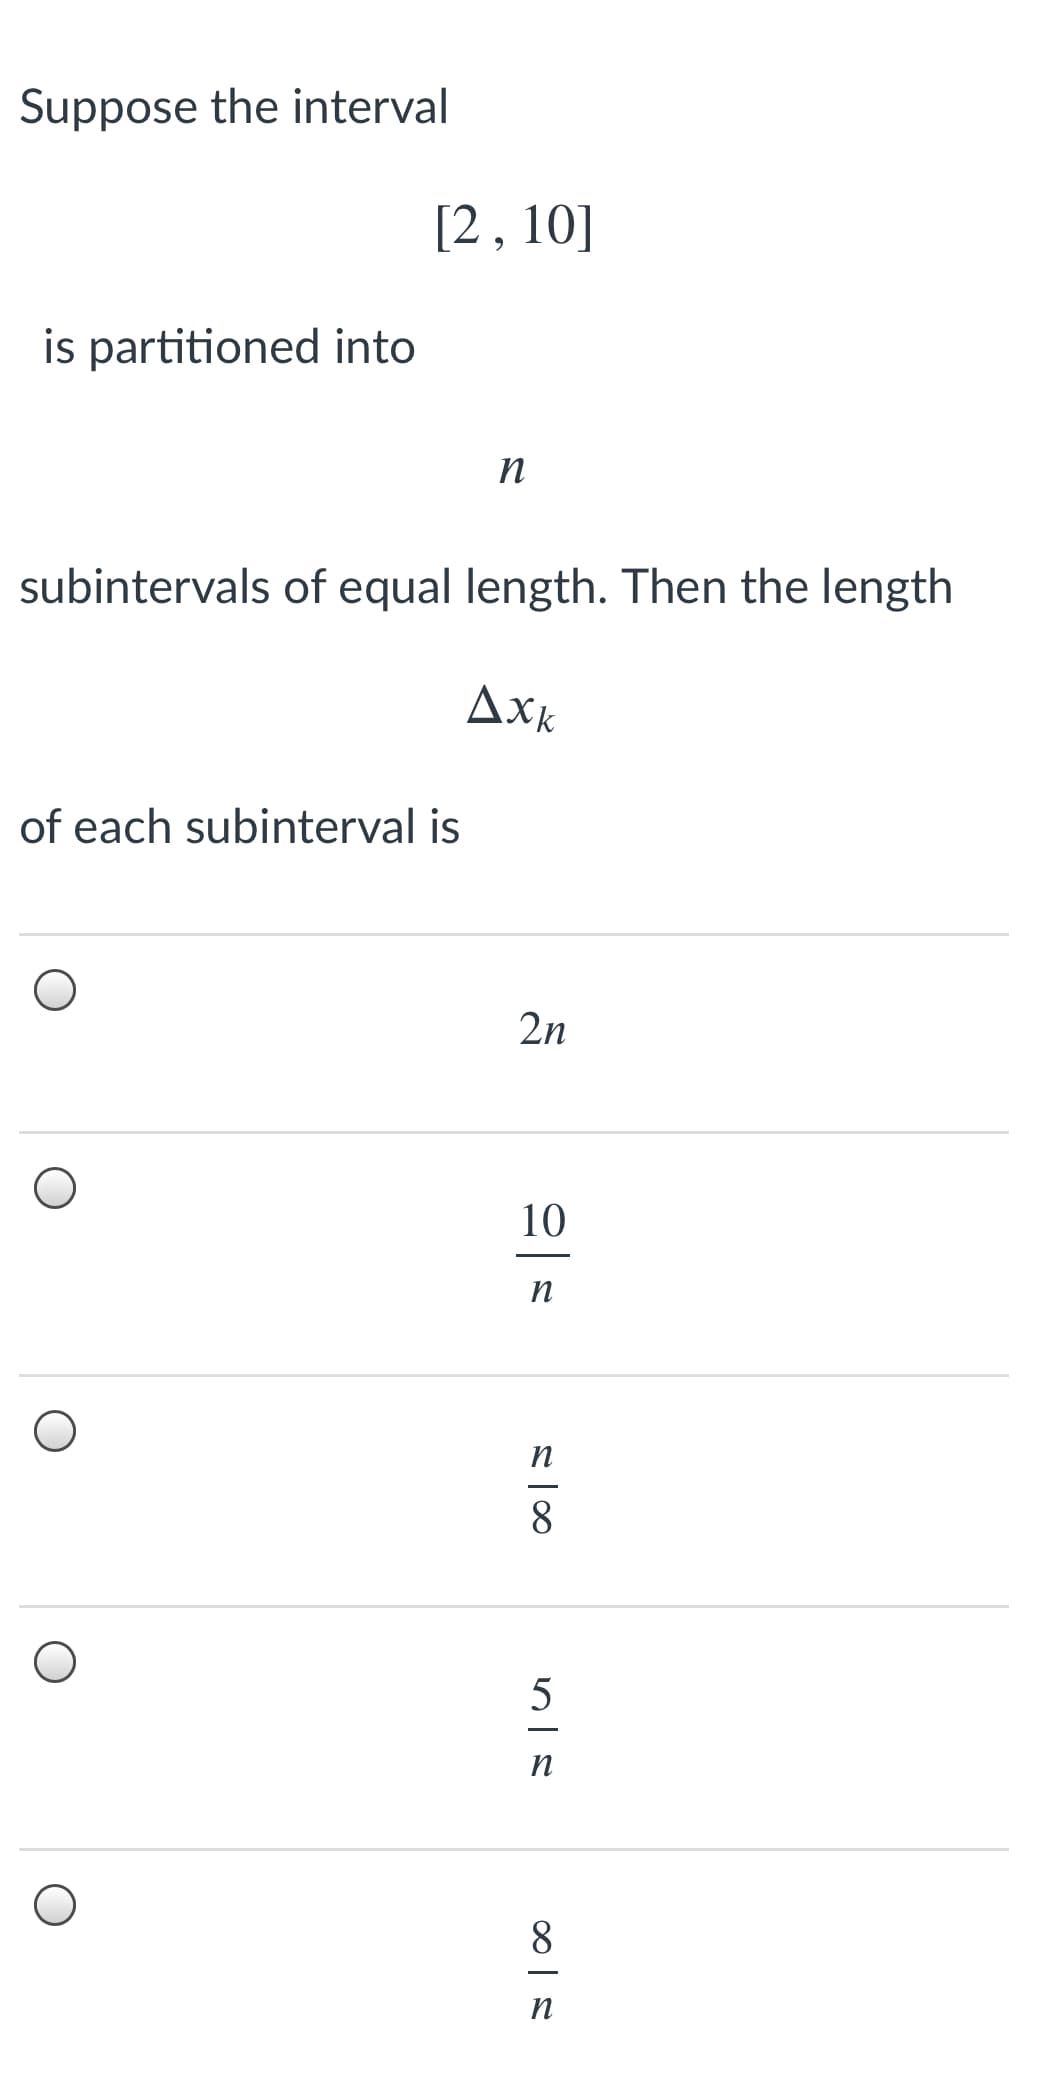 Suppose the interval
[2, 10]
is partitioned into
n
subintervals of equal length. Then the length
Axk
of each subinterval is
2n
10
n
n
8
n
8
n
